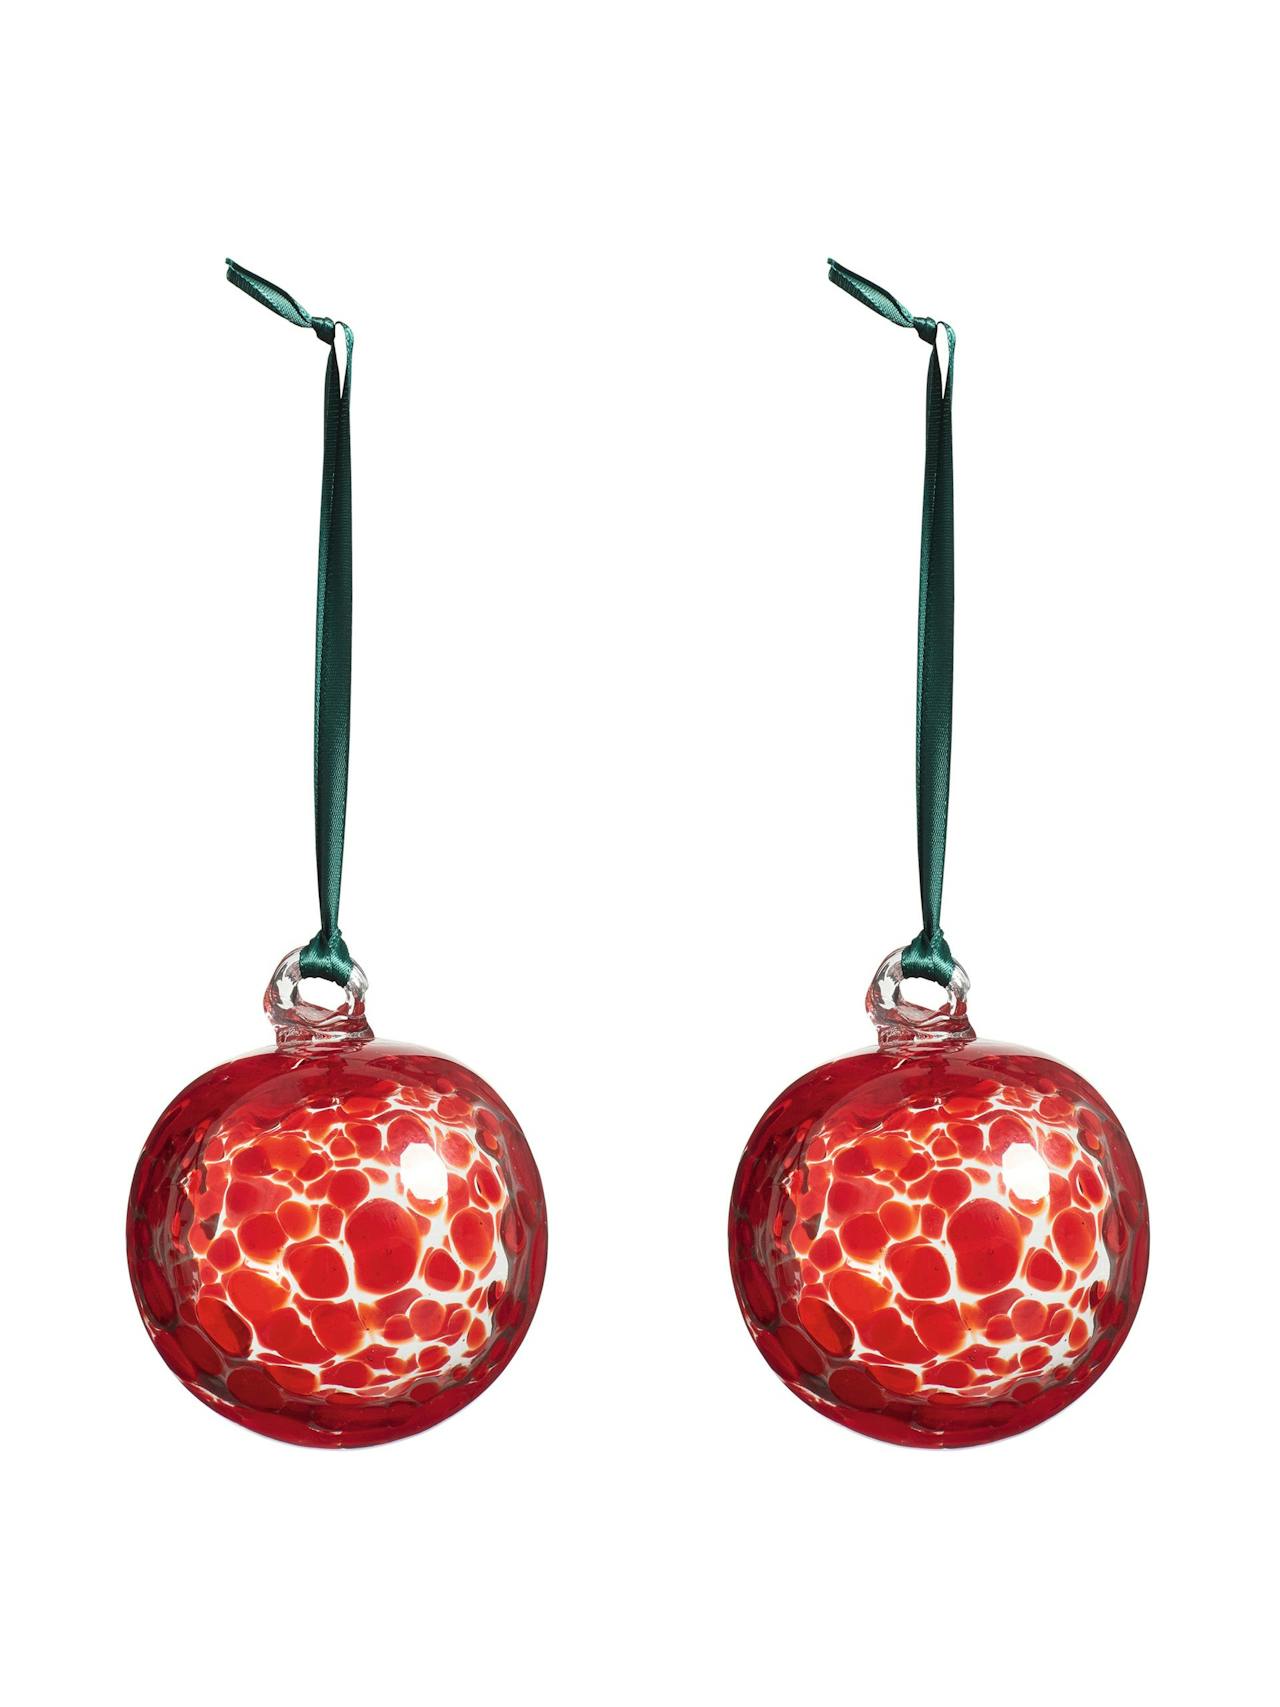 Glass bauble tree decorations (set of 2)